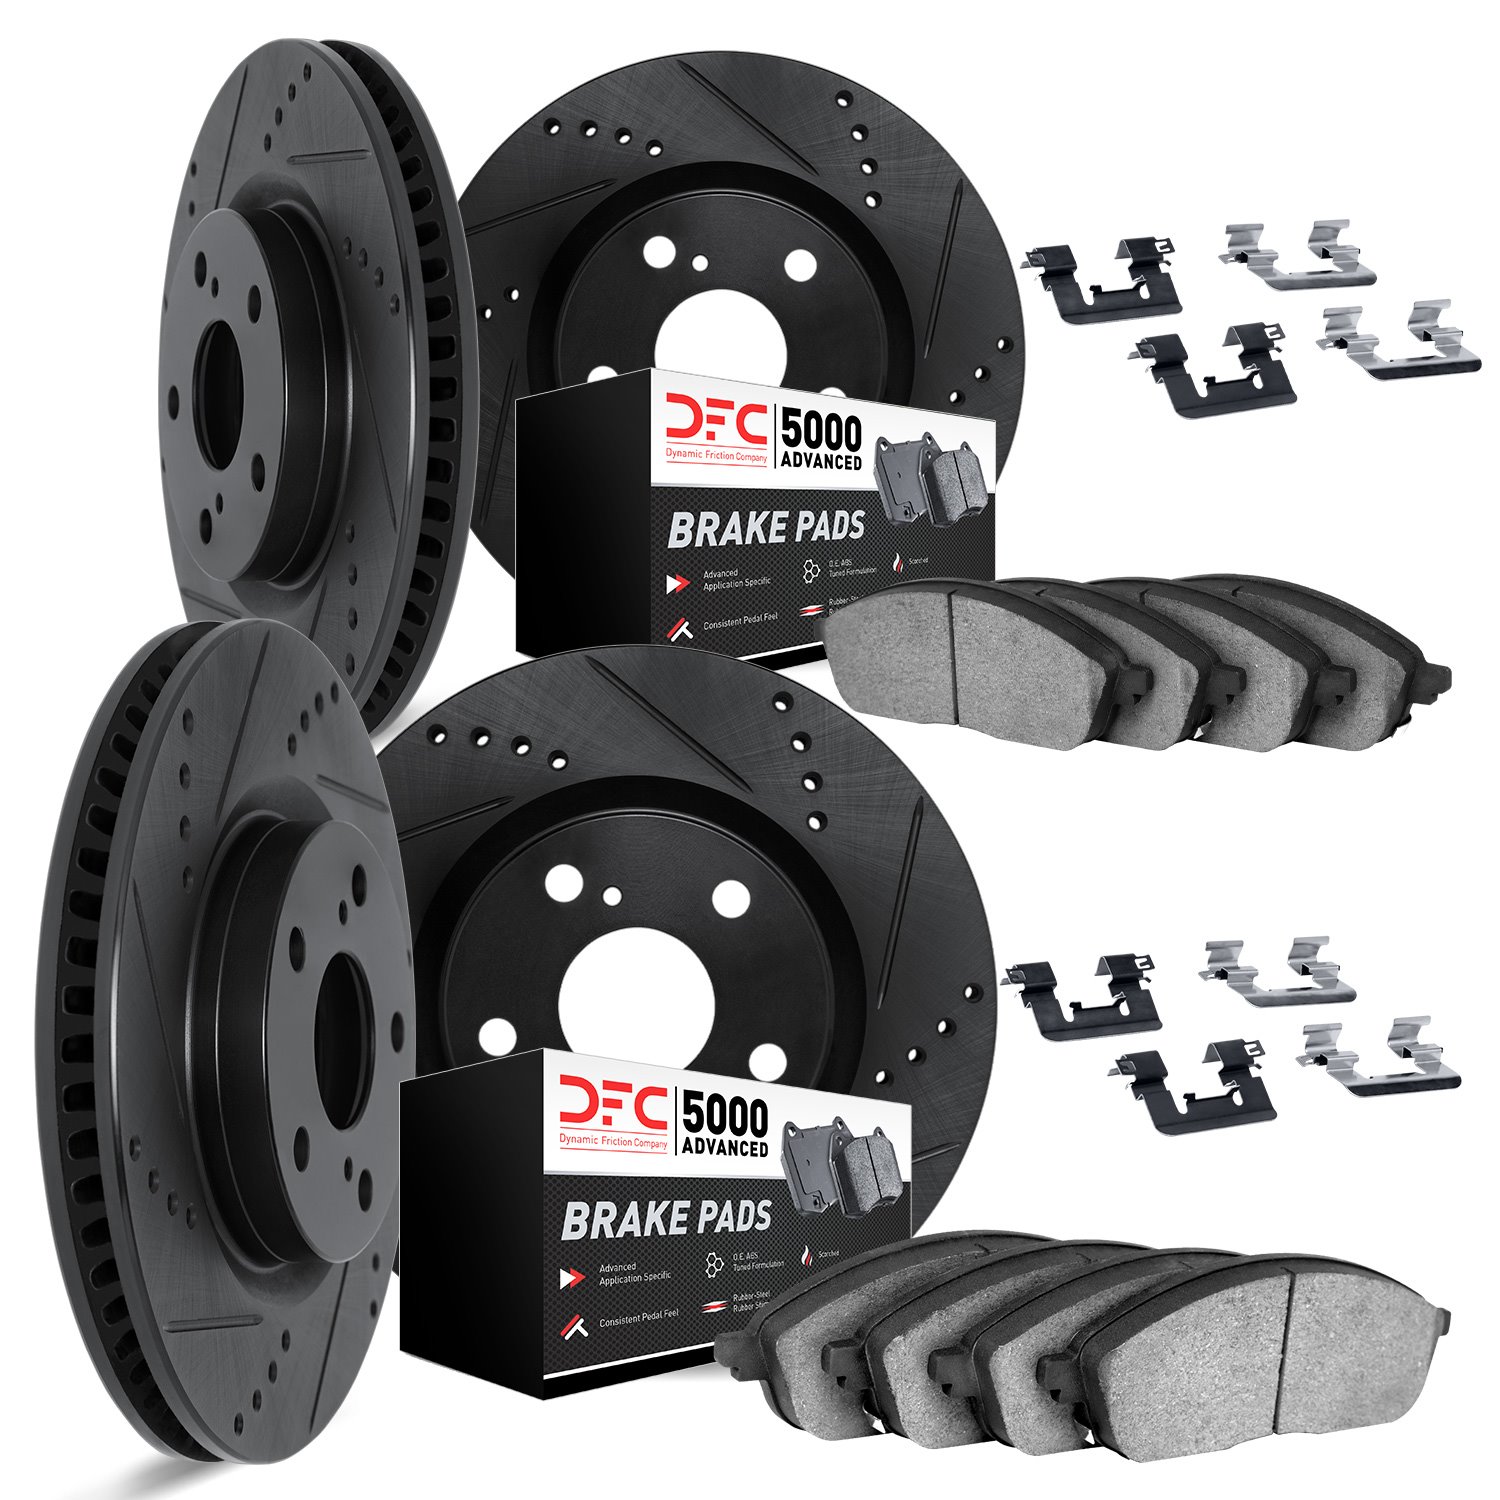 8514-31013 Drilled/Slotted Brake Rotors w/5000 Advanced Brake Pads Kit & Hardware [Black], 2004-2010 BMW, Position: Front and Re